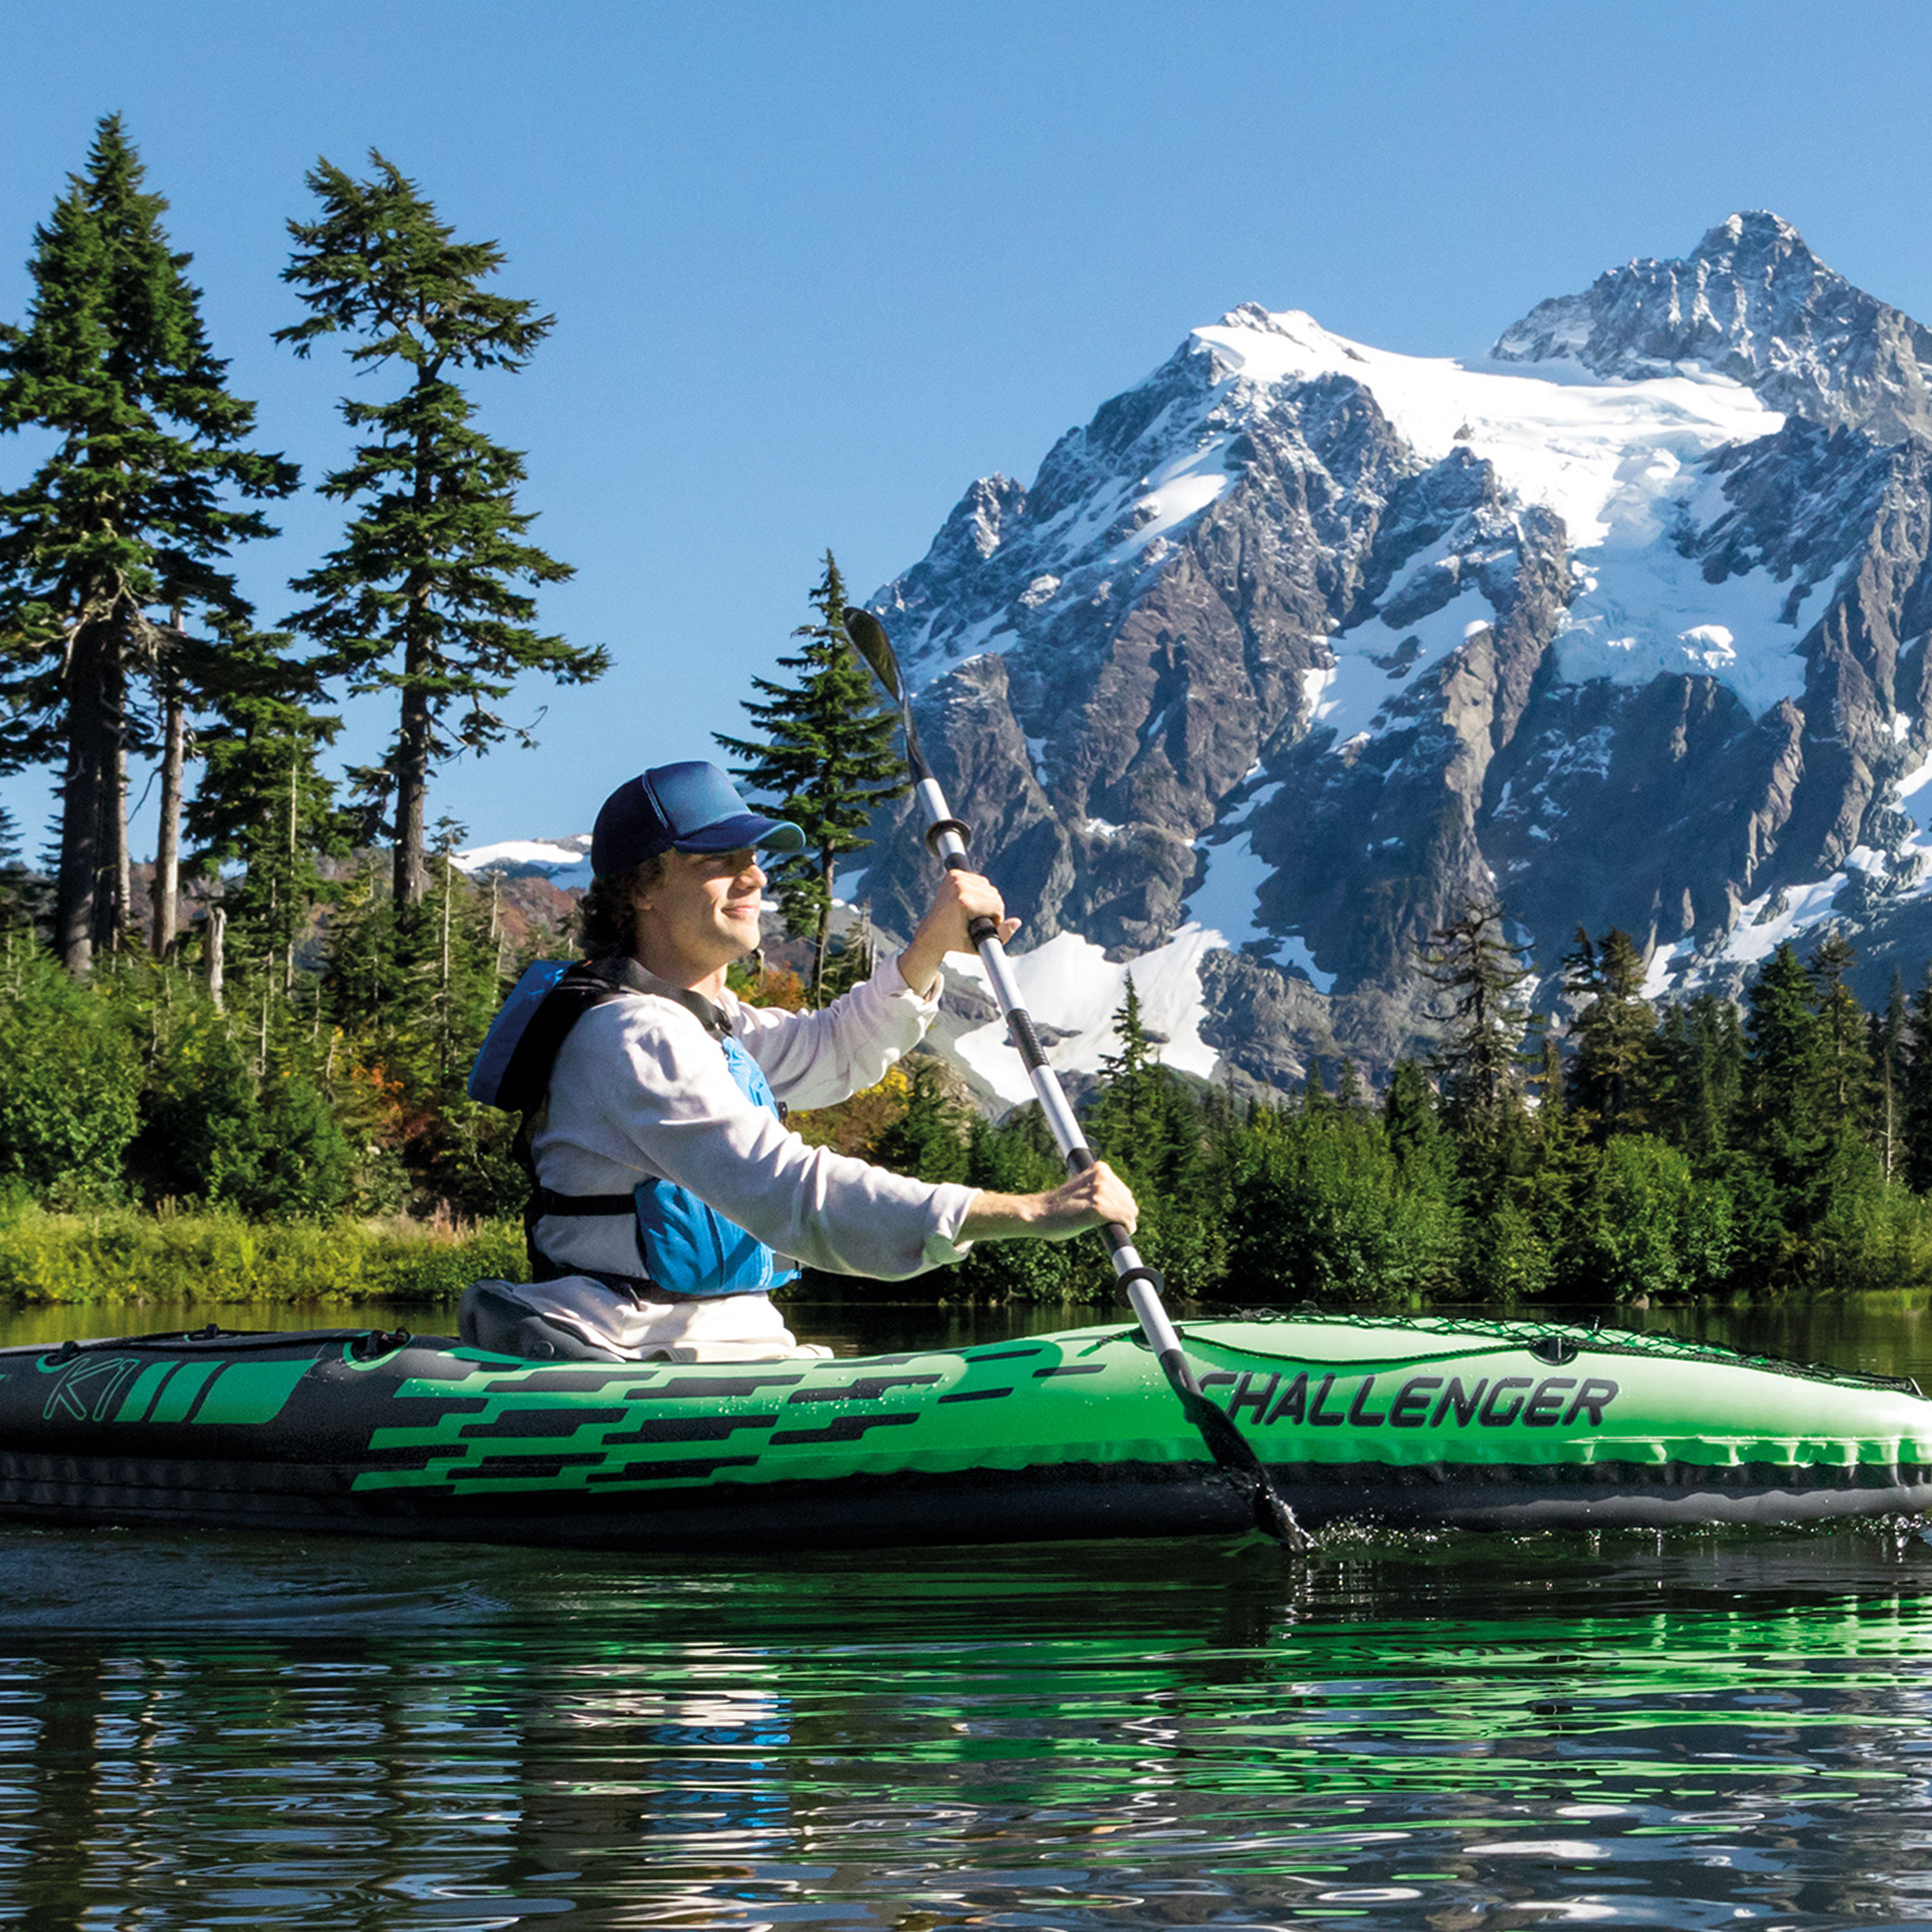 Intex Challenger K1 Inflatable Single Person Kayak Set and Accessory Kit w/ Pump - image 3 of 6